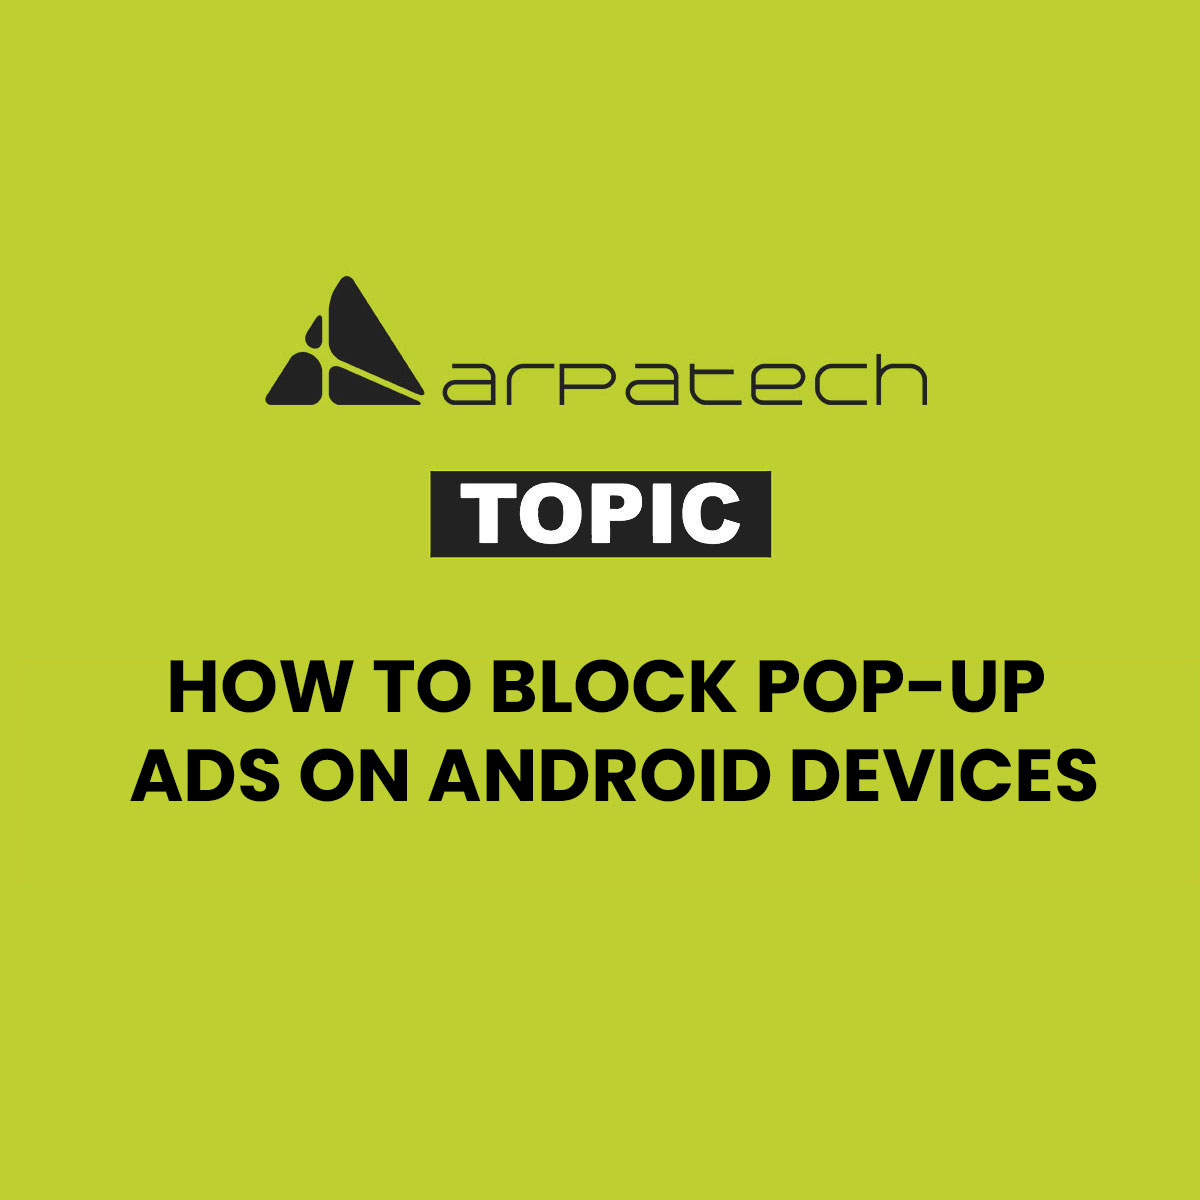 How to Block Pop-up Ads on Android Devices